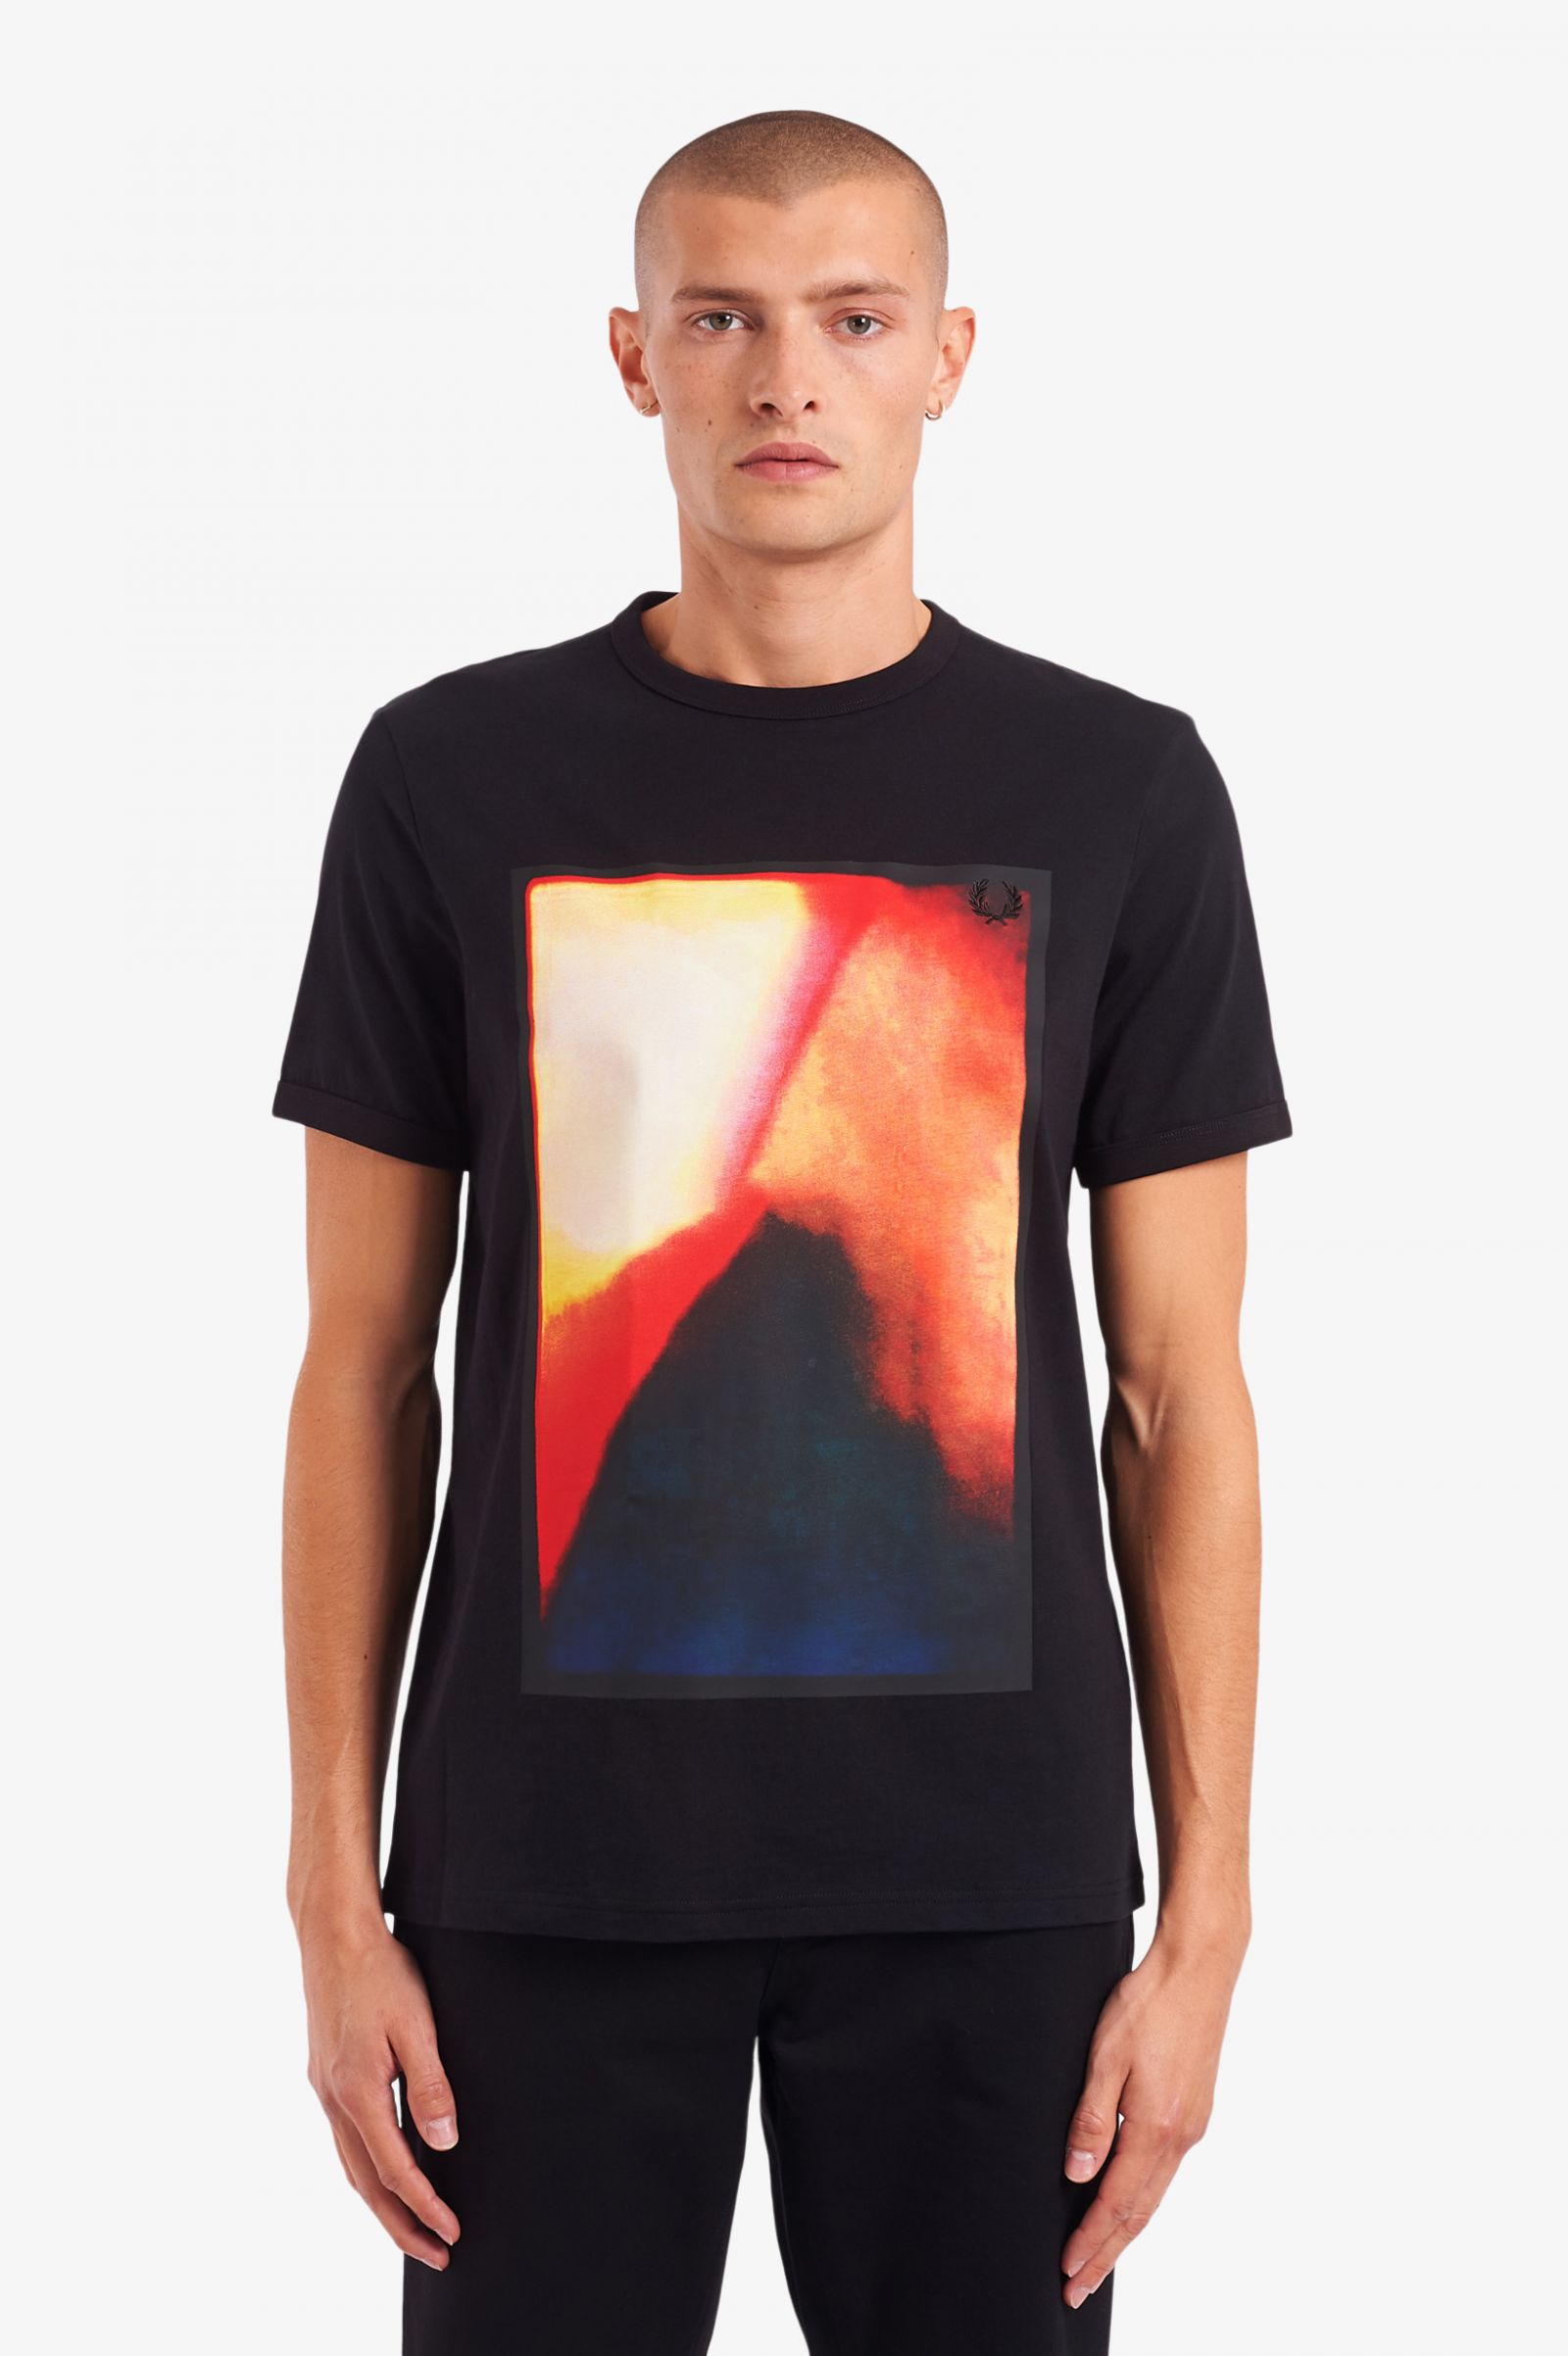 Abstract Graphic T Shirt Black Men S T Shirts Designer T Shirts For Men Fred Perry Uk